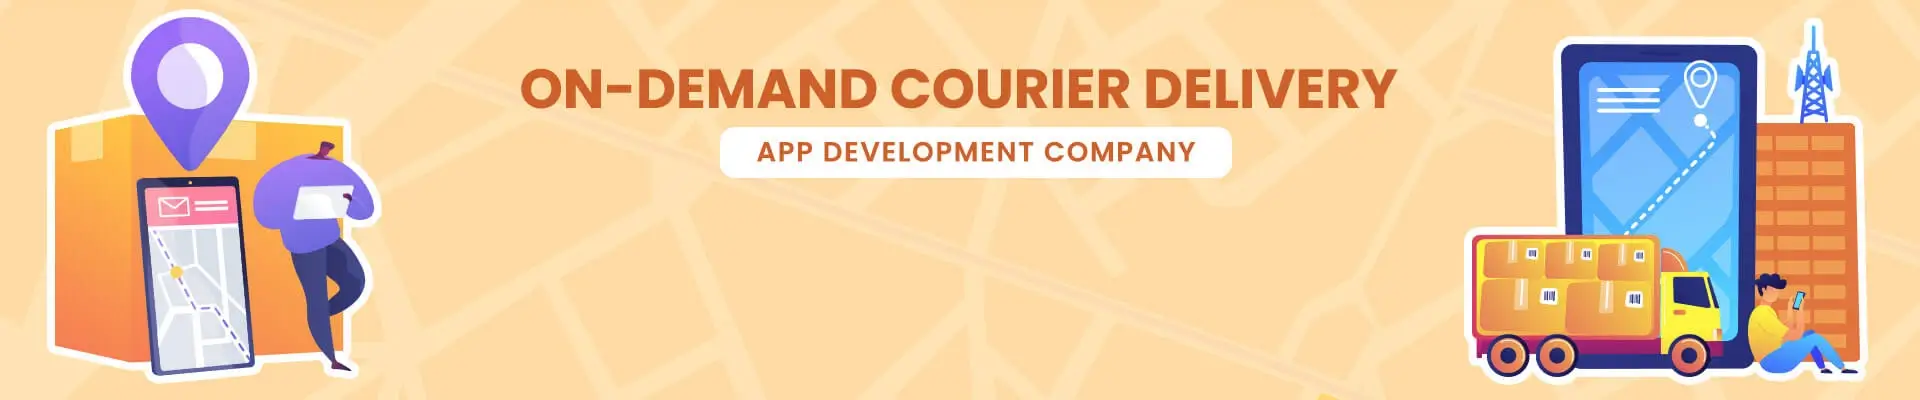 Best On-demand Courier Delivery App Development Company | Courier Delivery App Developers For Hire